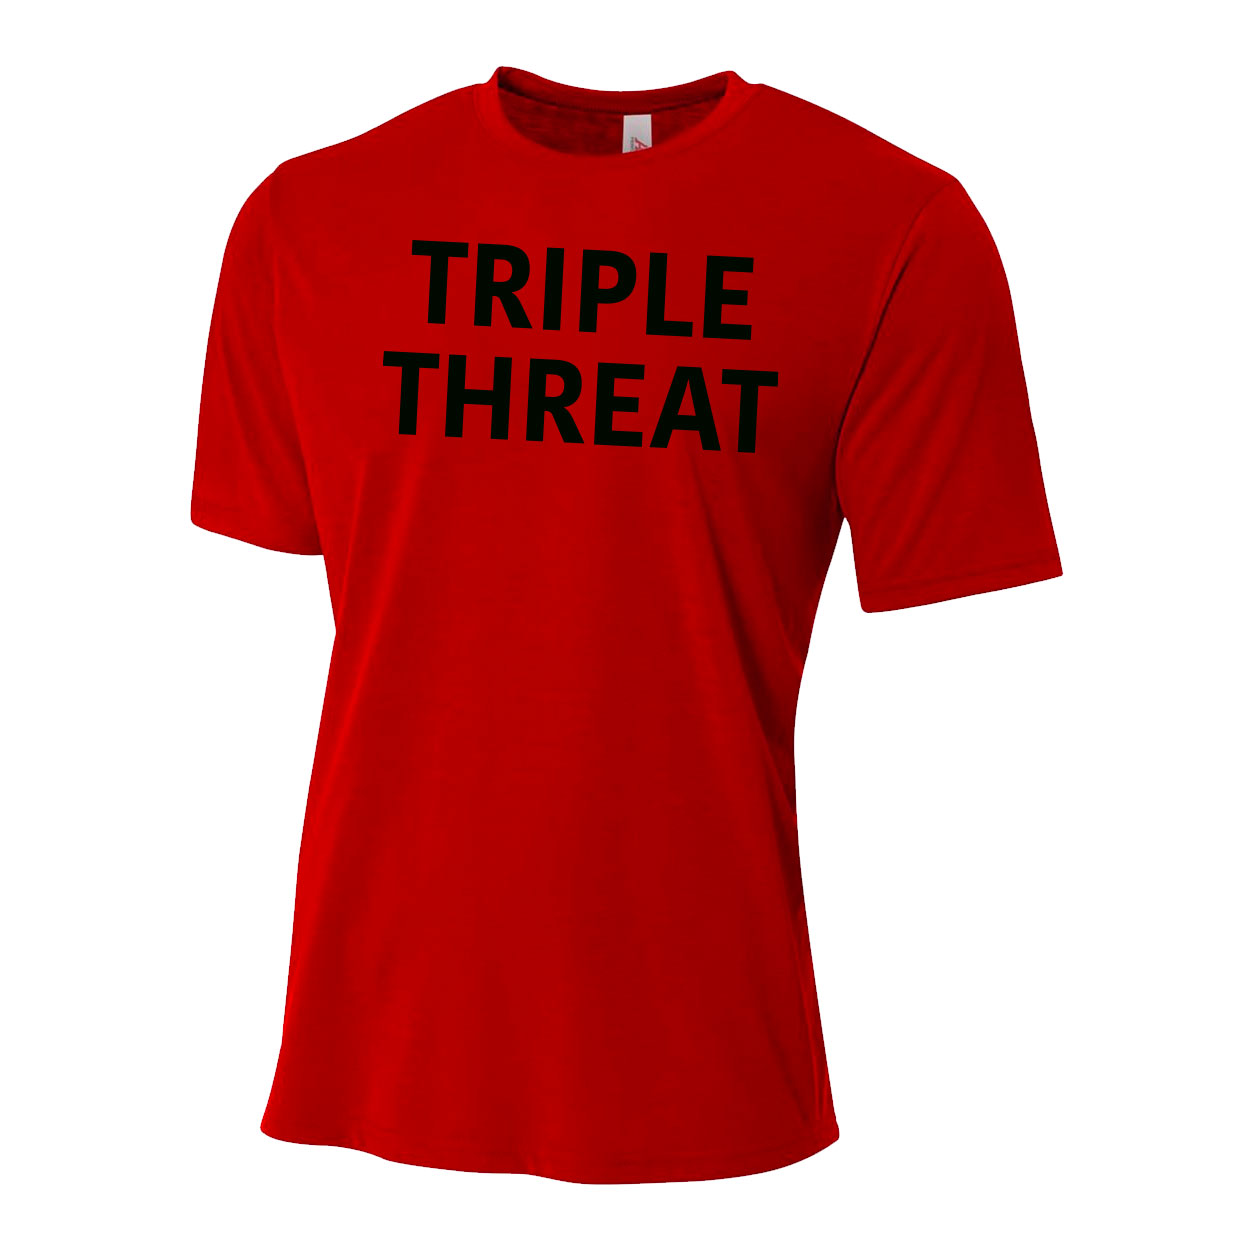 TRIPLE THREAT YOUTH, WOMEN'S & MEN'S PERFORMANCE SHORT SLEEVE TEE - RED